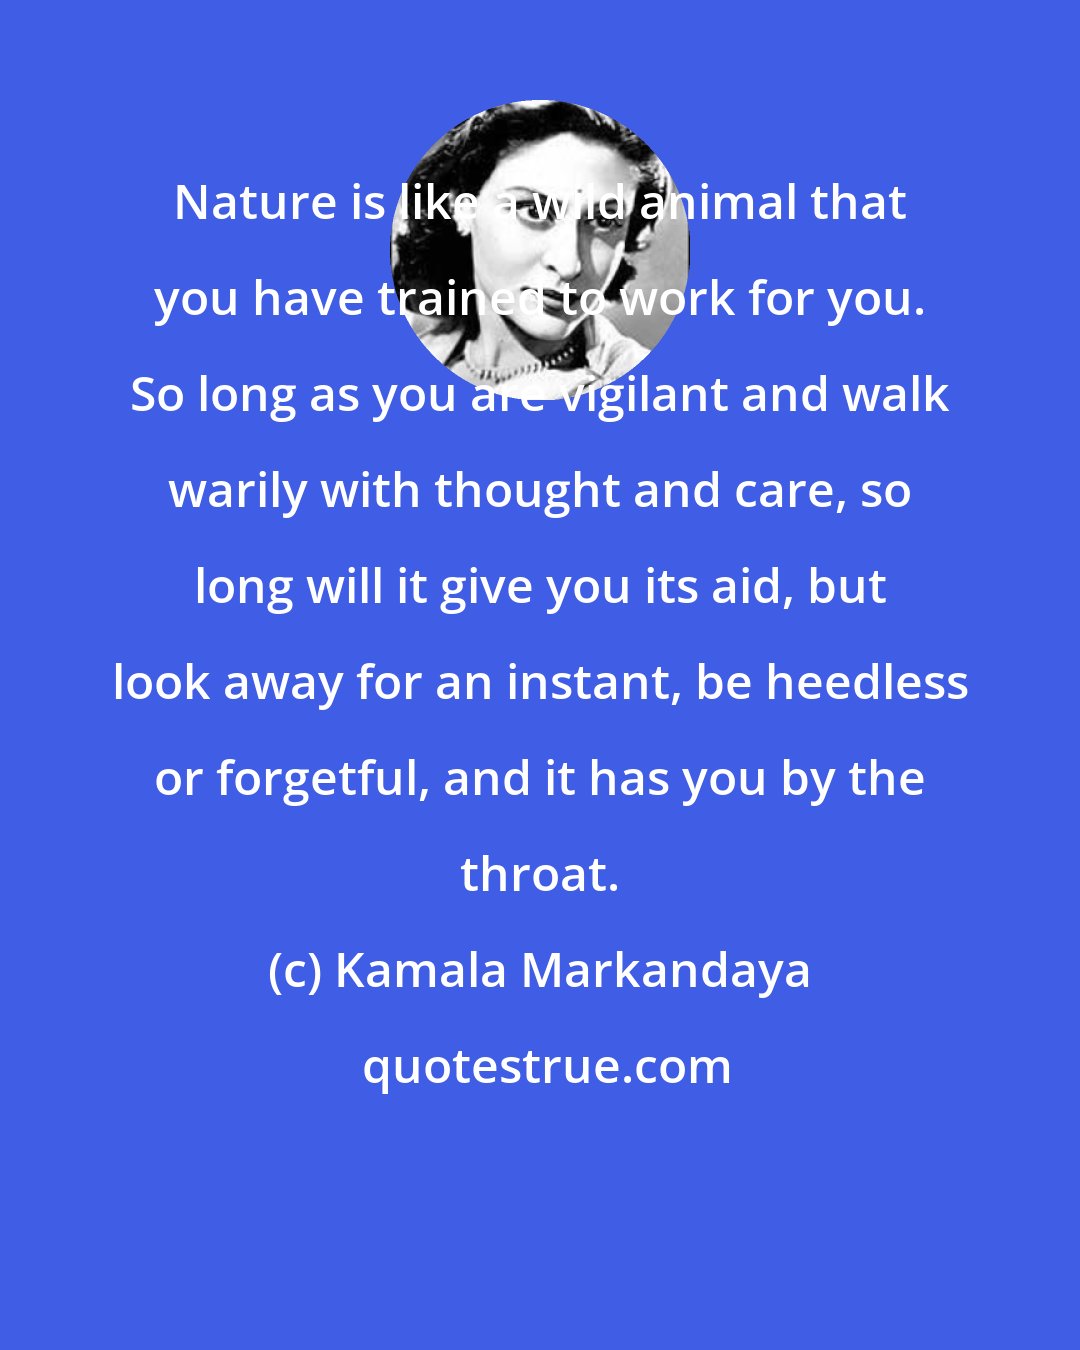 Kamala Markandaya: Nature is like a wild animal that you have trained to work for you. So long as you are vigilant and walk warily with thought and care, so long will it give you its aid, but look away for an instant, be heedless or forgetful, and it has you by the throat.